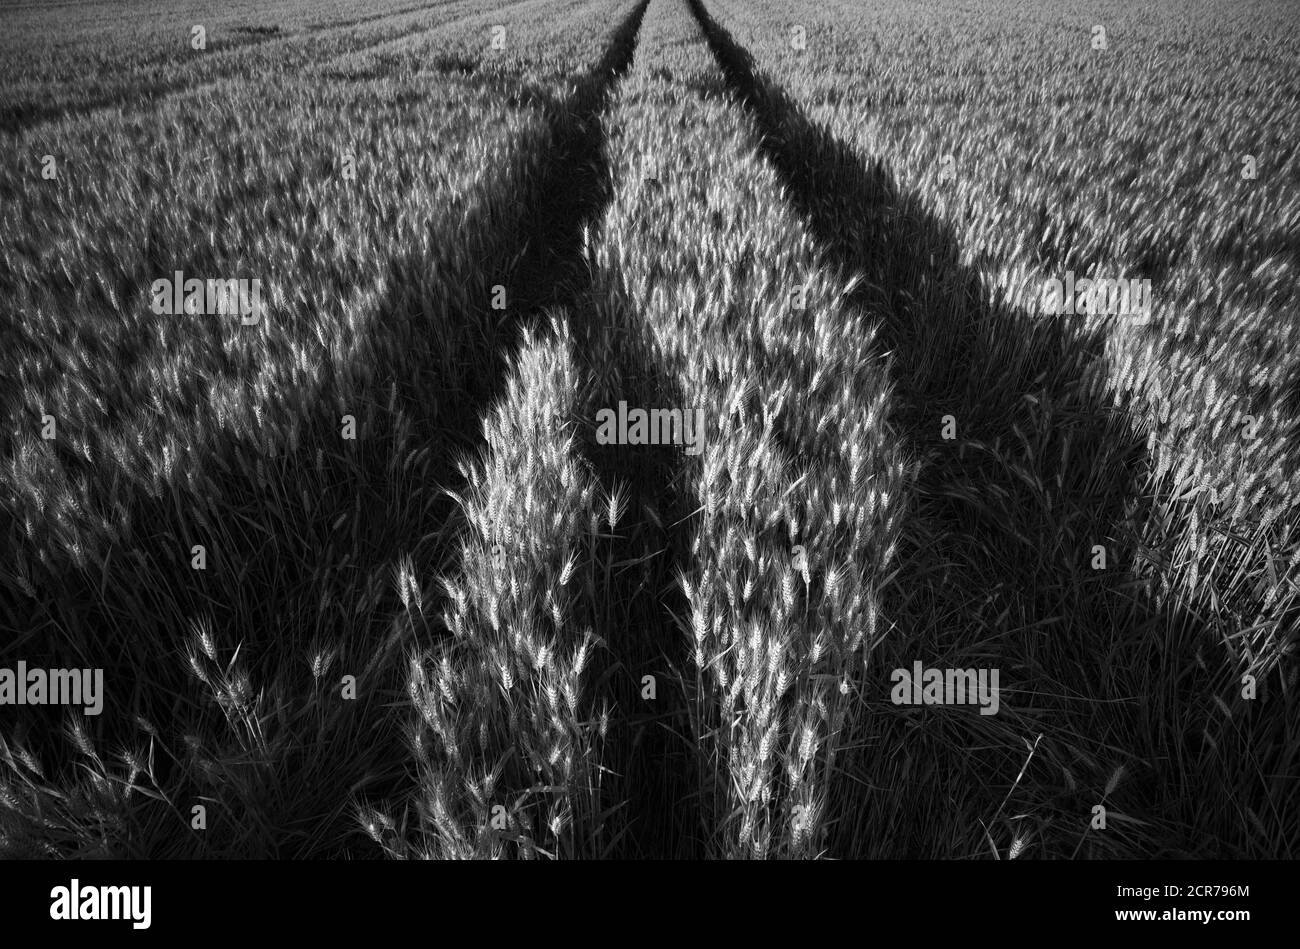 Tracks in the wheat field, Baden-Württemberg, Germany Stock Photo